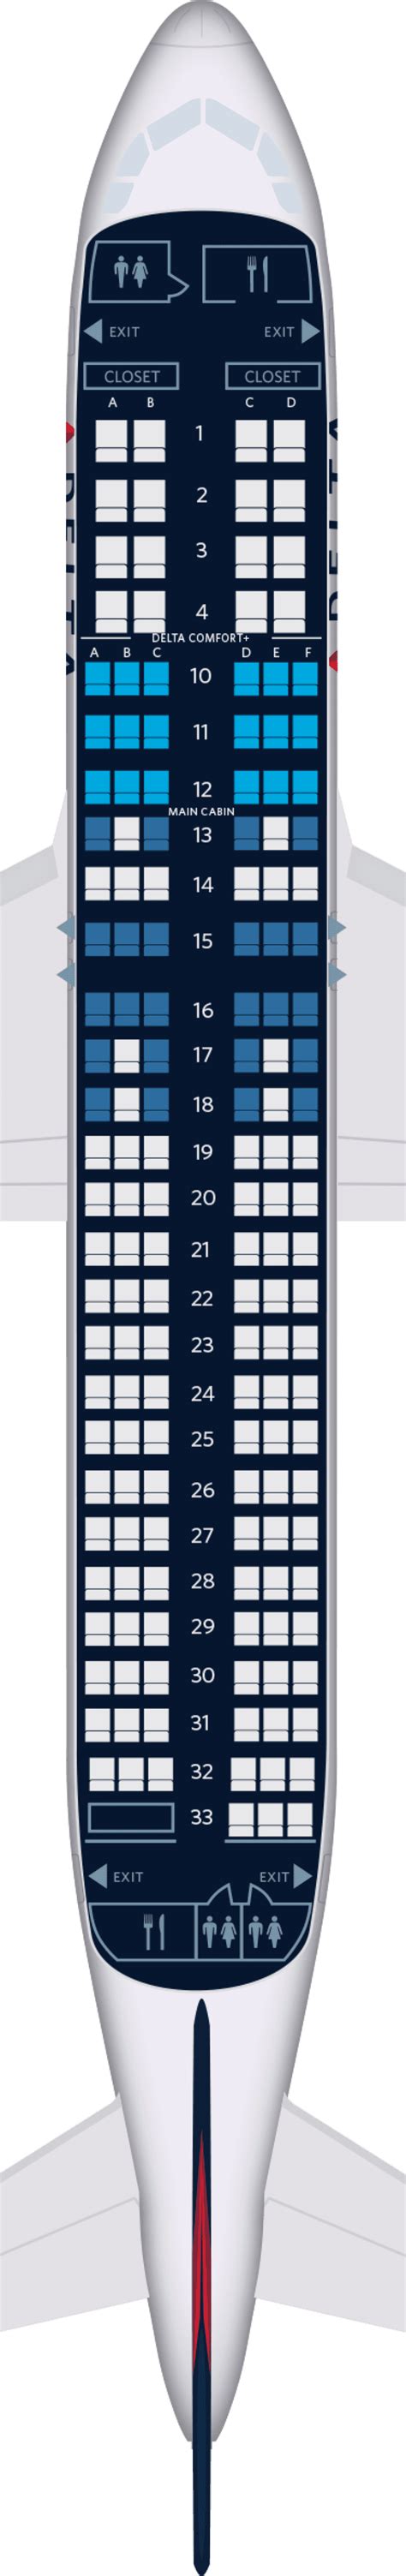 Airbus A320 Seating Chart United Airlines Best Picture Of Chart